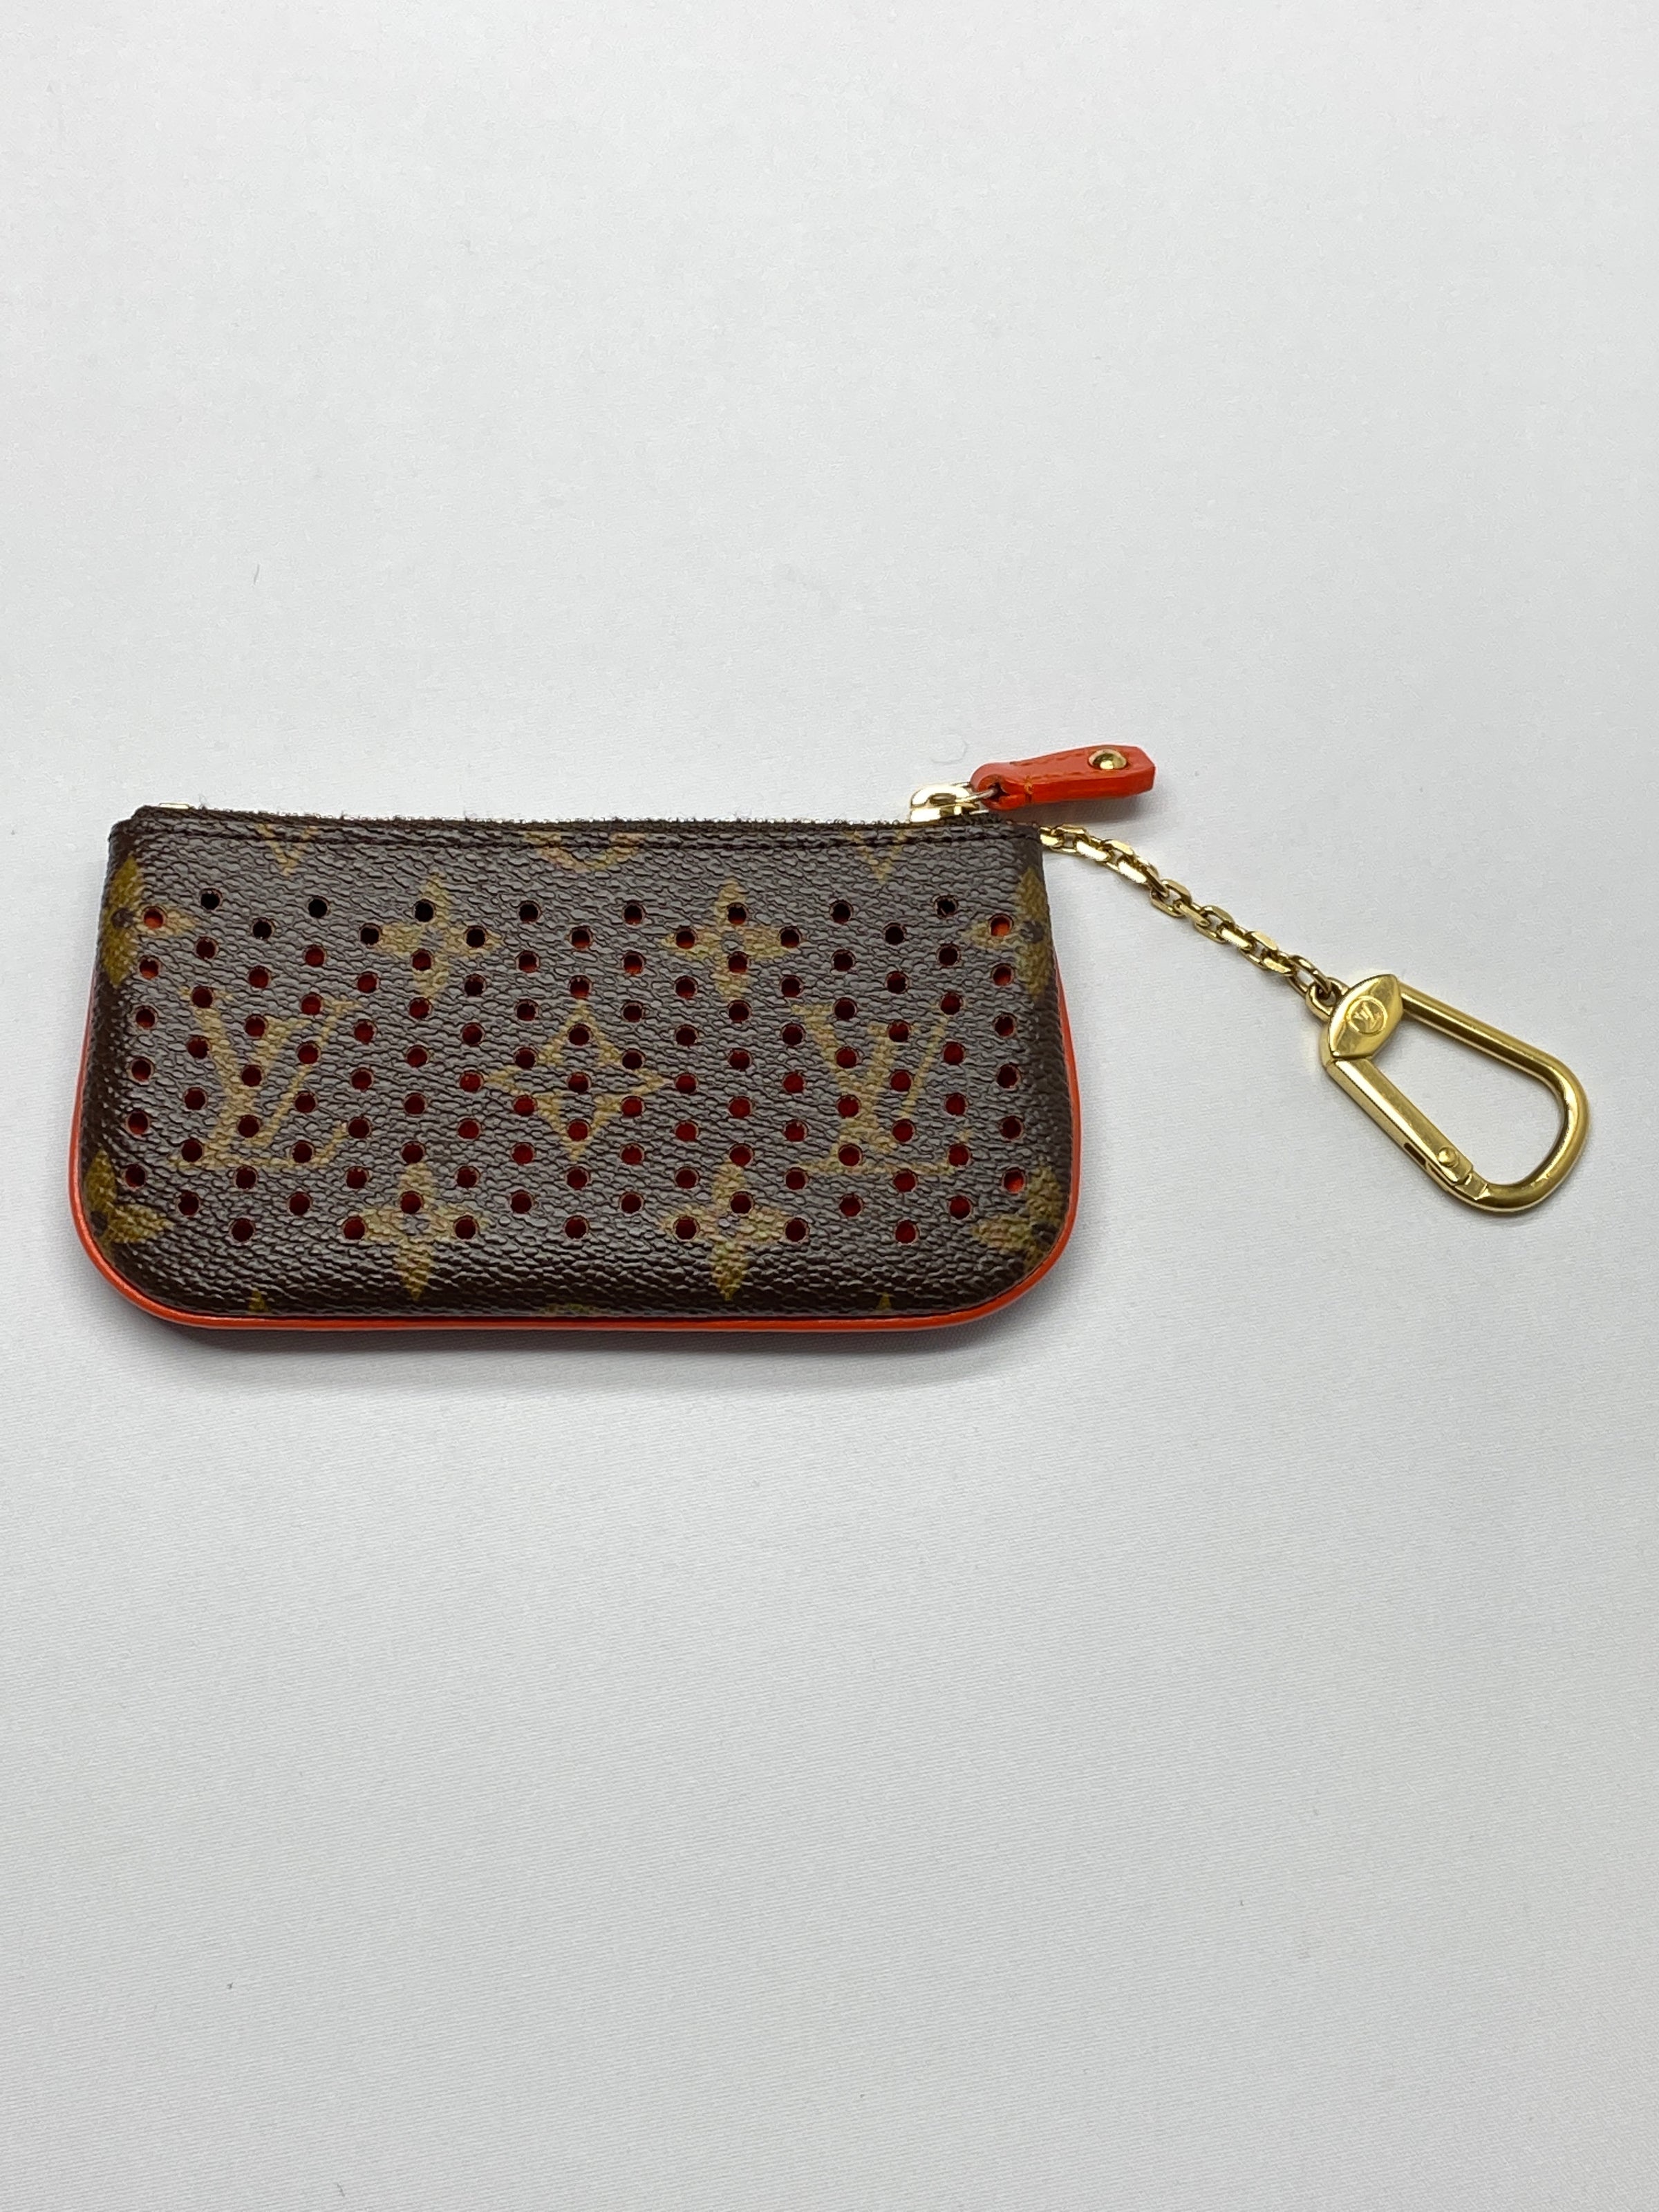 Louis Vuitton Limited Edition Perforated Key Cles Pouch Monogram